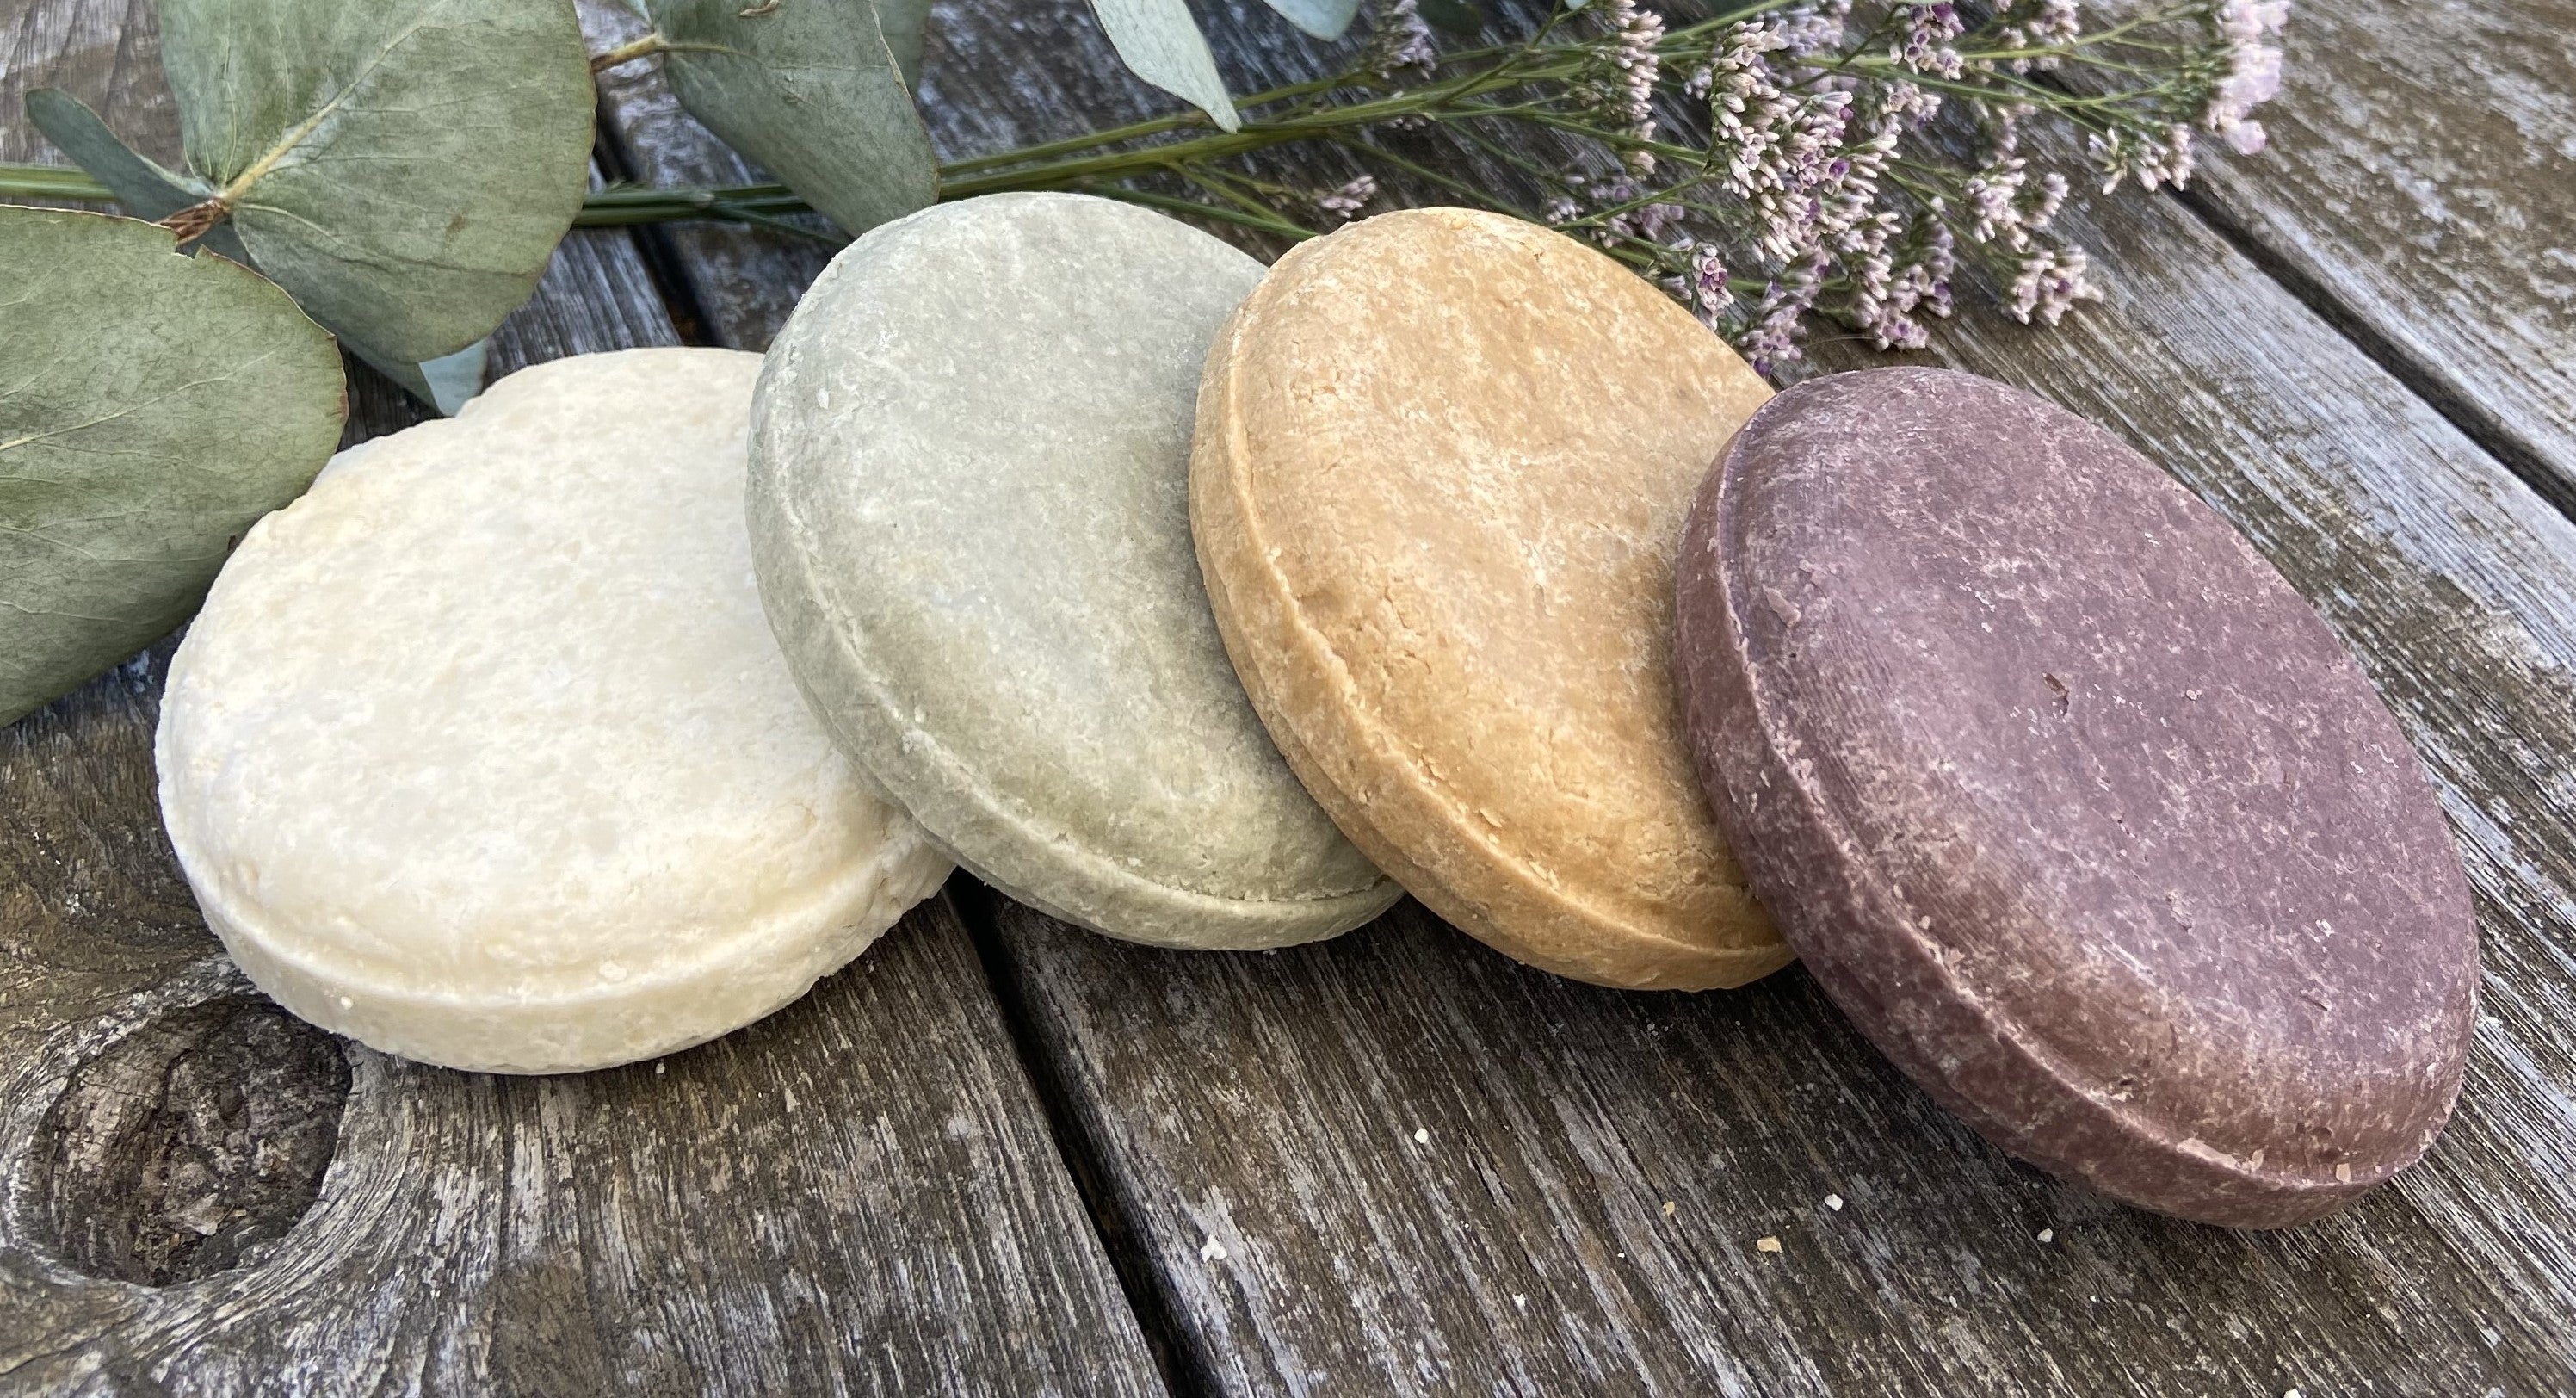 Four all natural shampoo bars. Gentle for hair and scalp. Good for the environment.